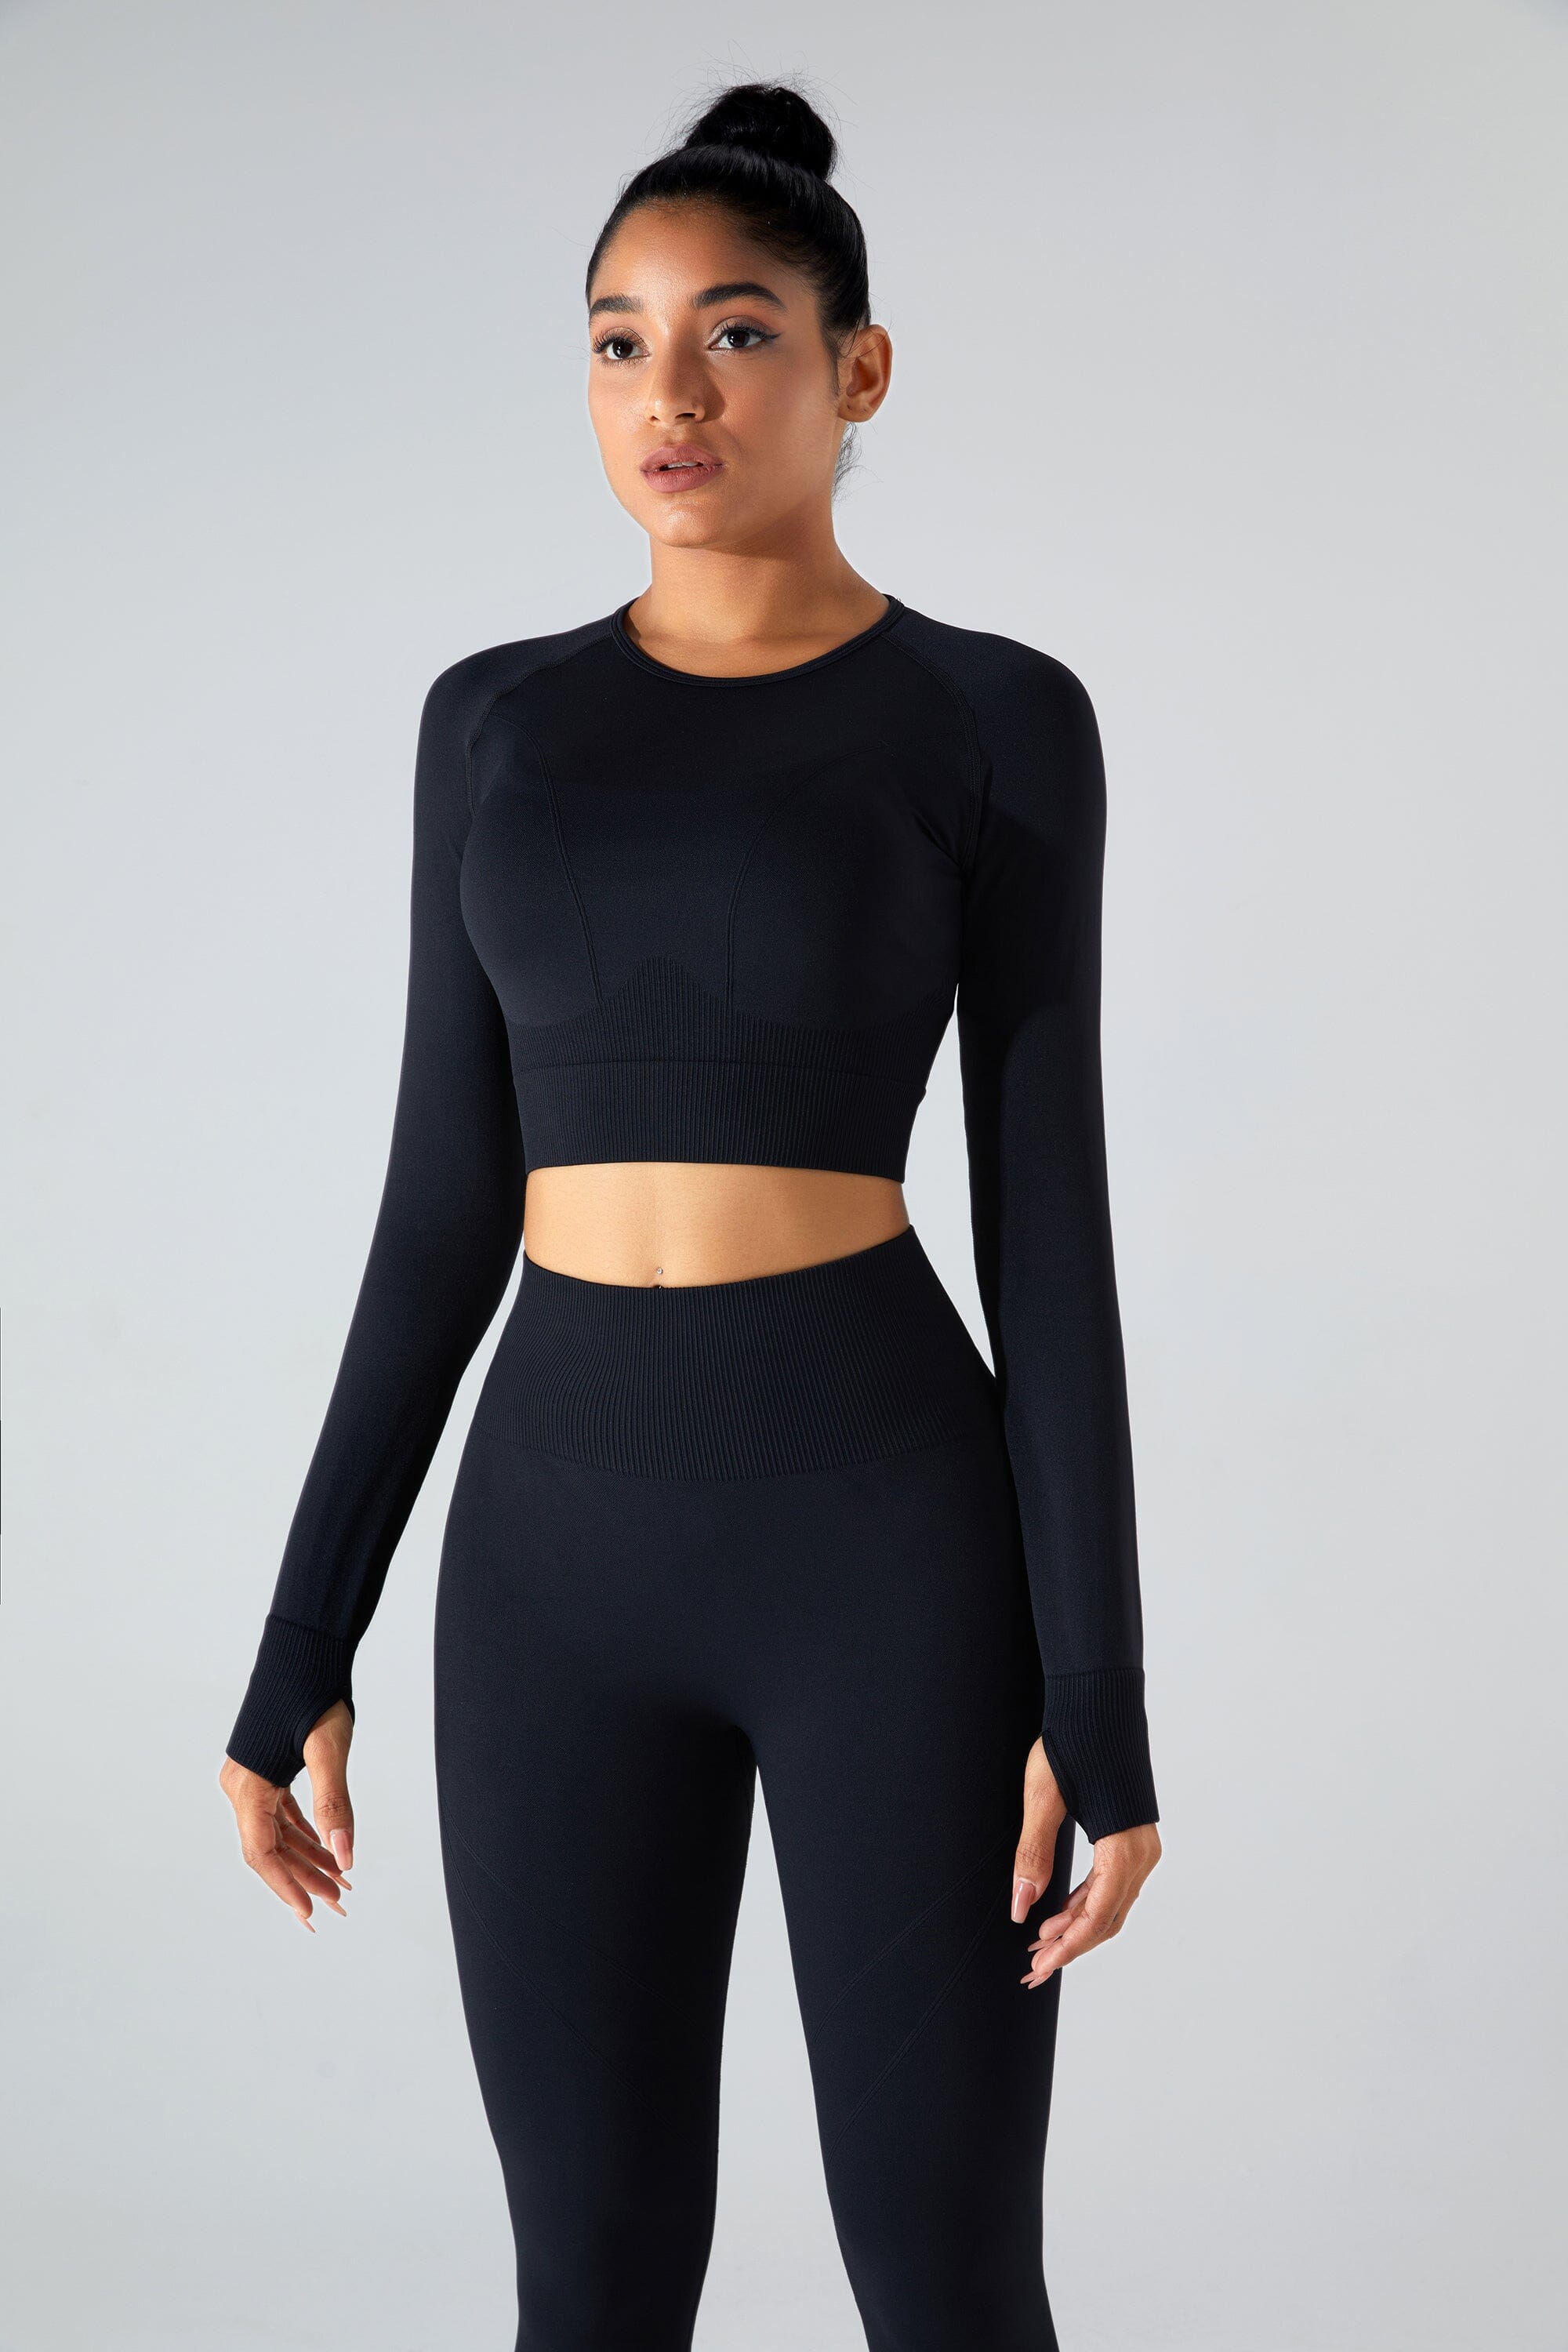 Eclipse Seamless Top Top Starlethics Black S 